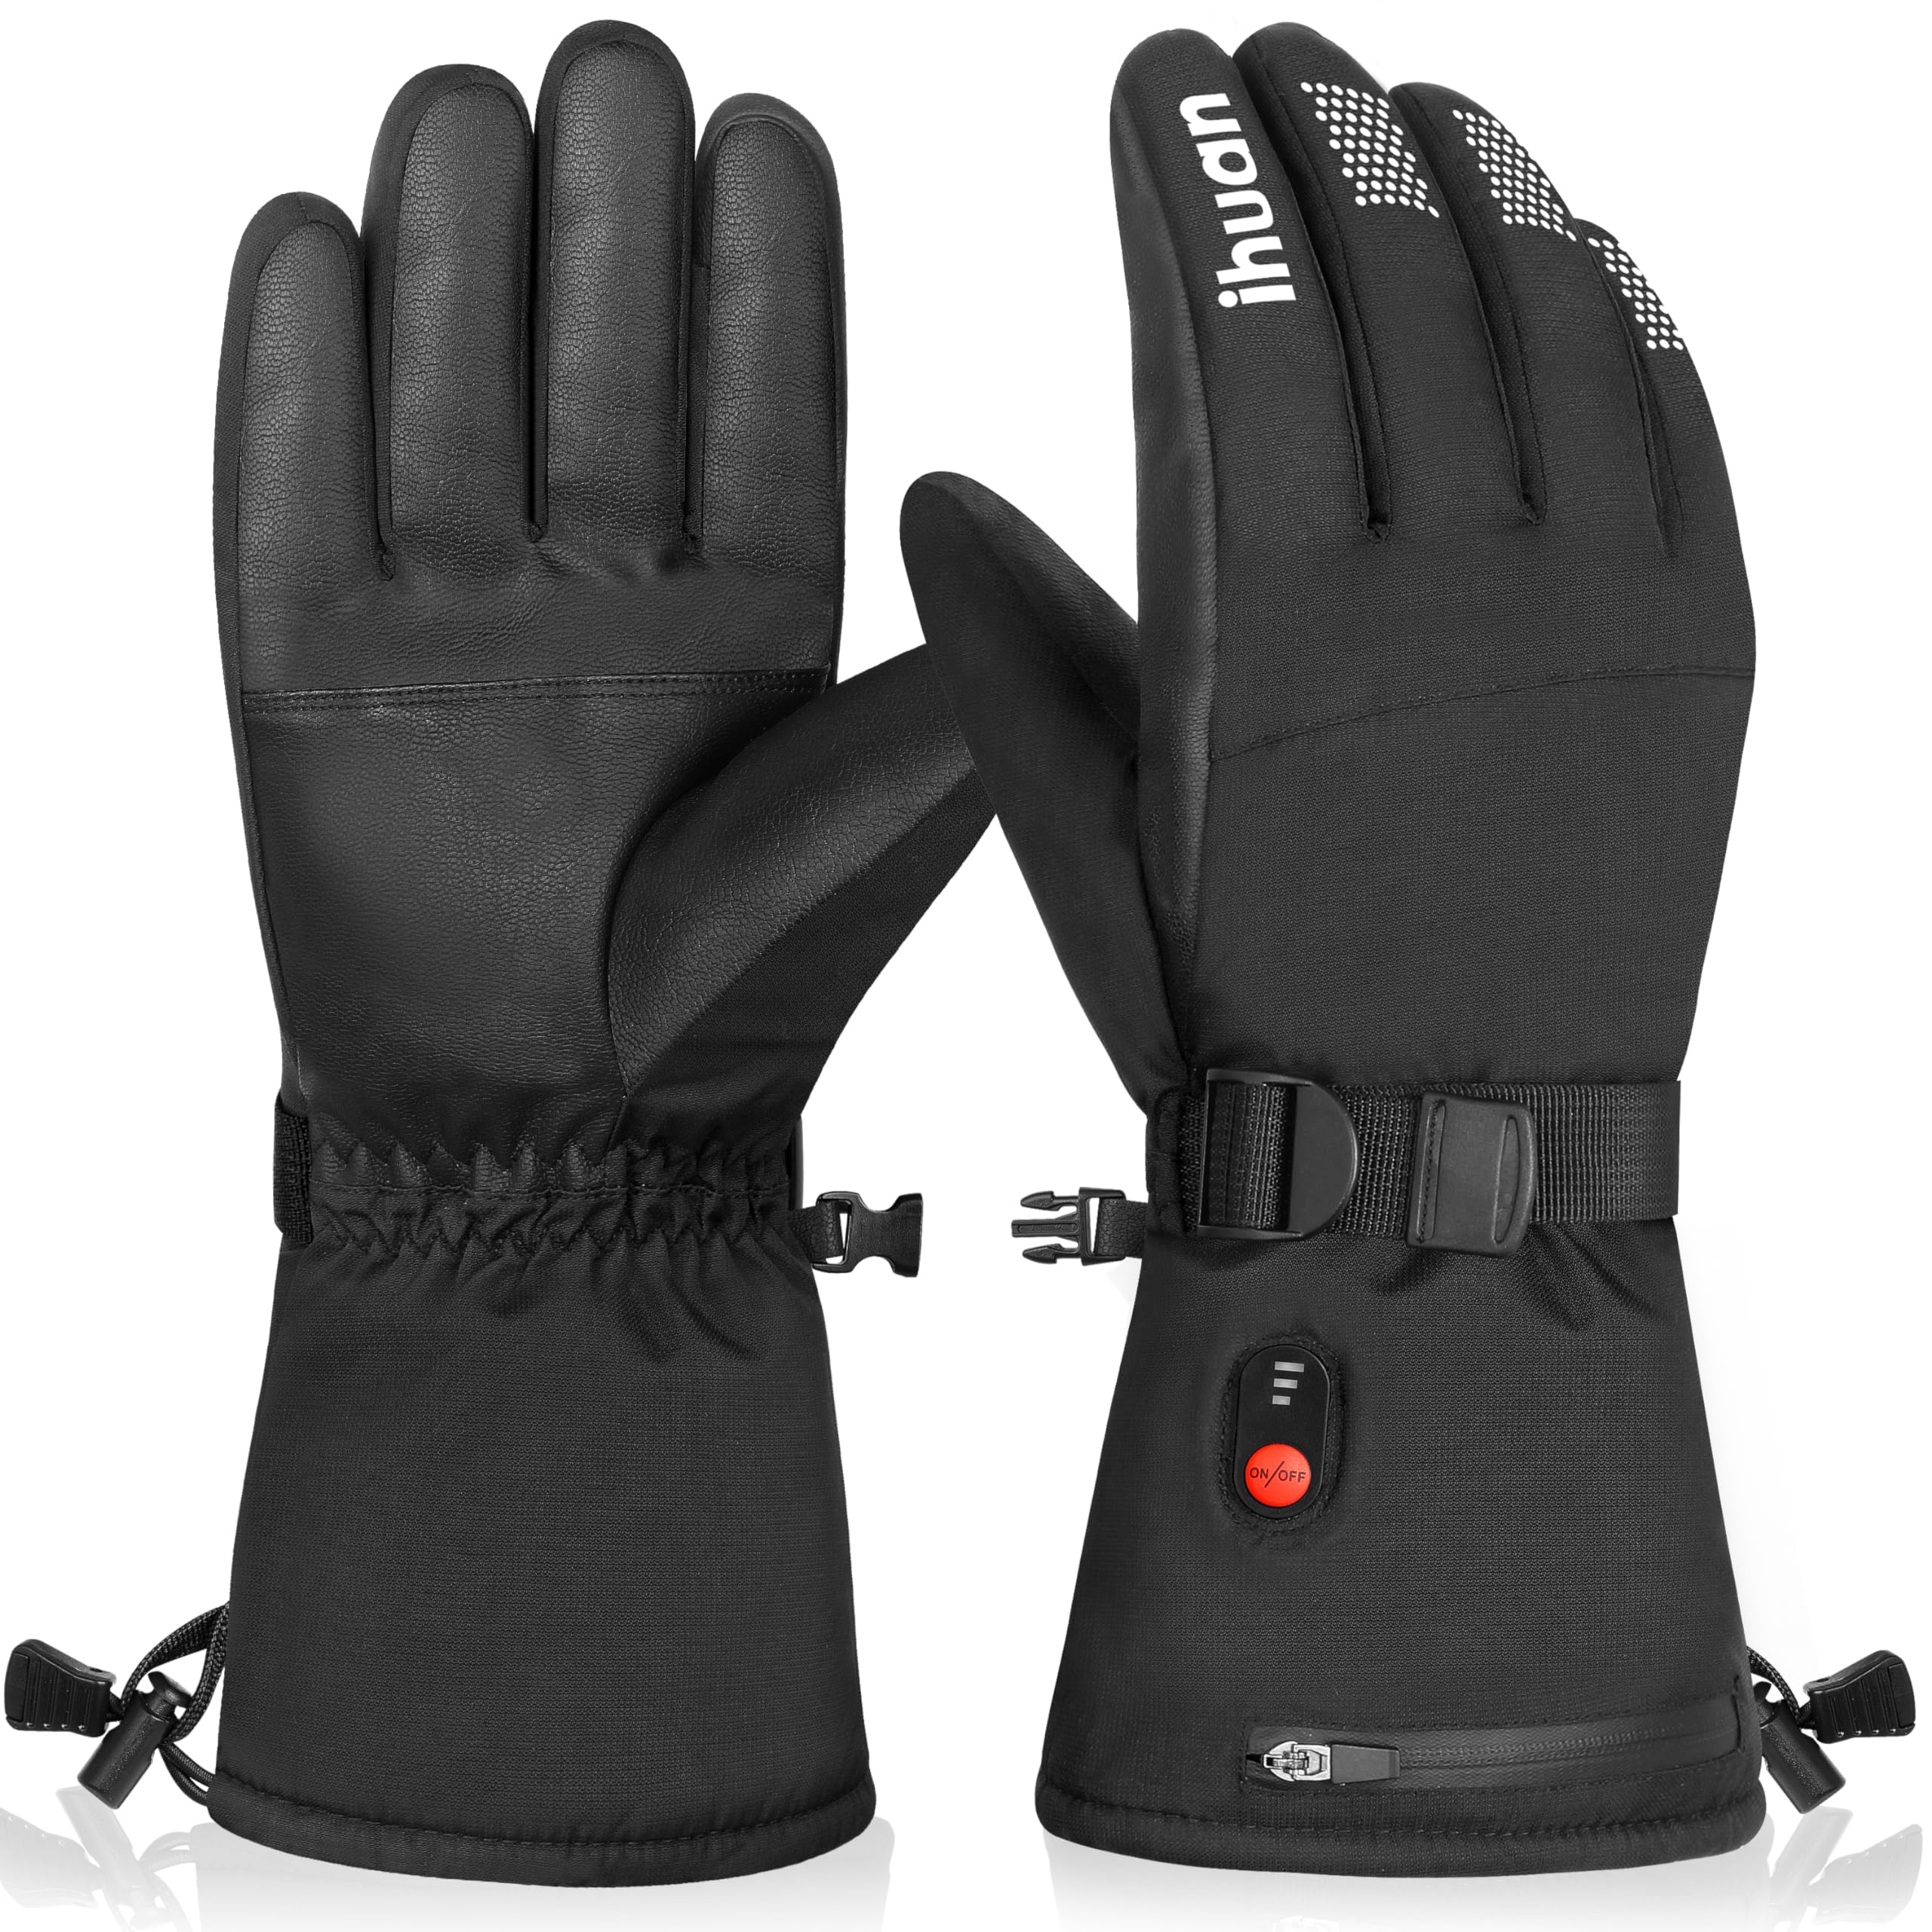 ihuan Waterproof Heated Gloves for Men Women - 5000mah Rechargeable Winter Heating Gloves, Touchscreen Electric Gloves Ski